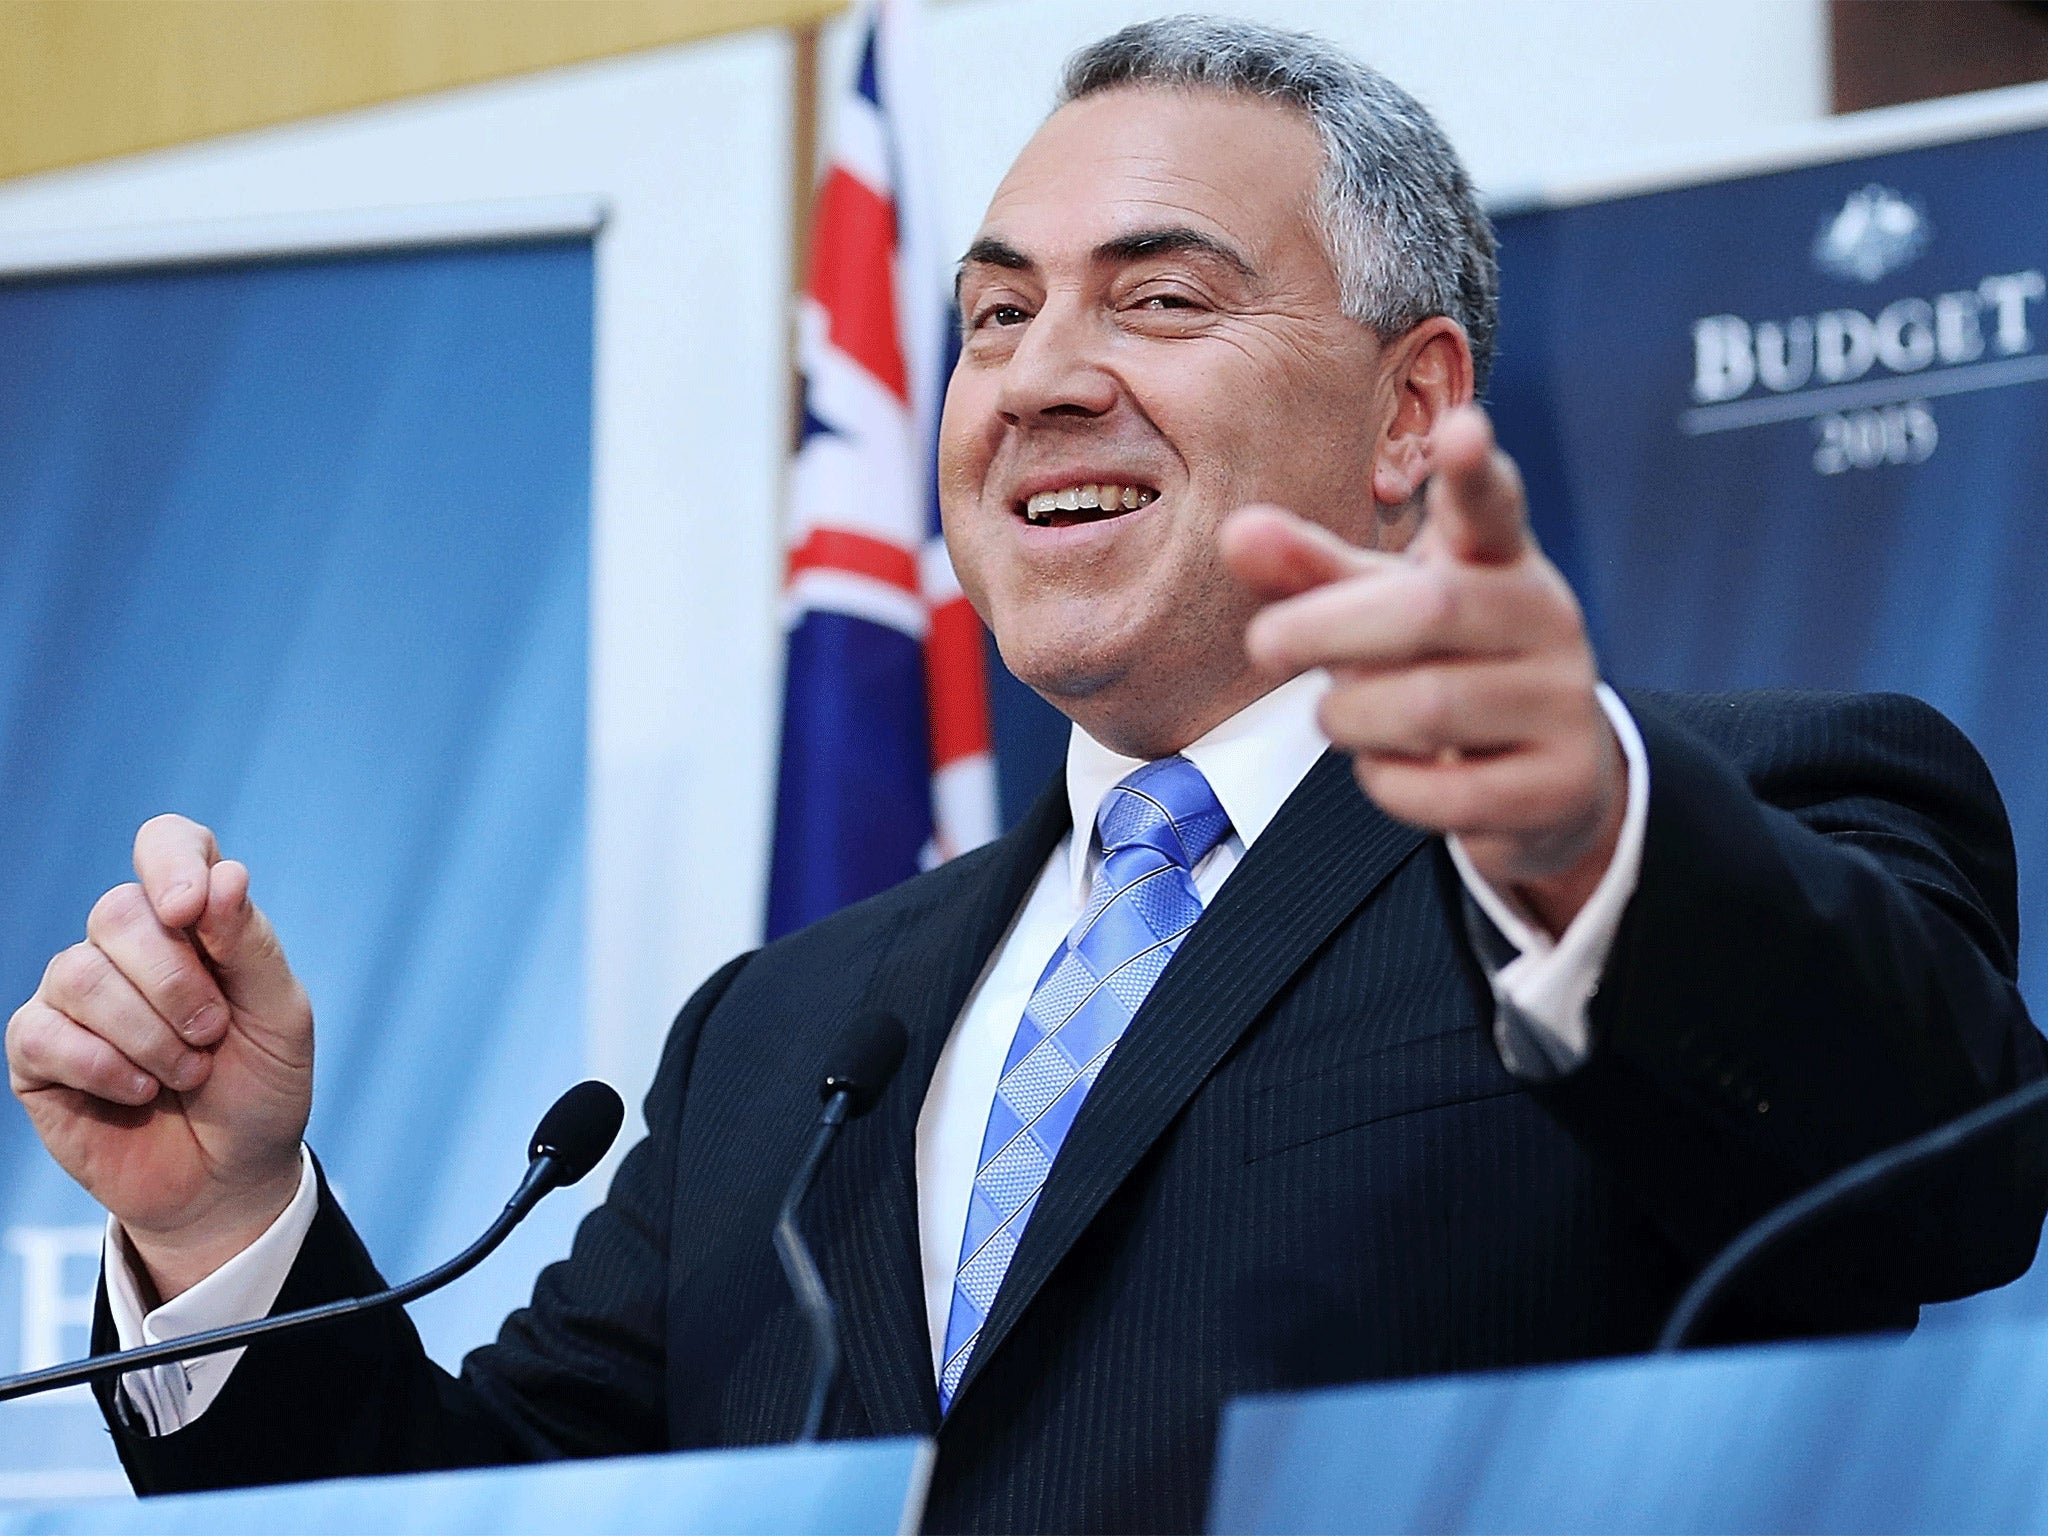 Joe Hockey has been accused of being out of touch with everyday economic realities